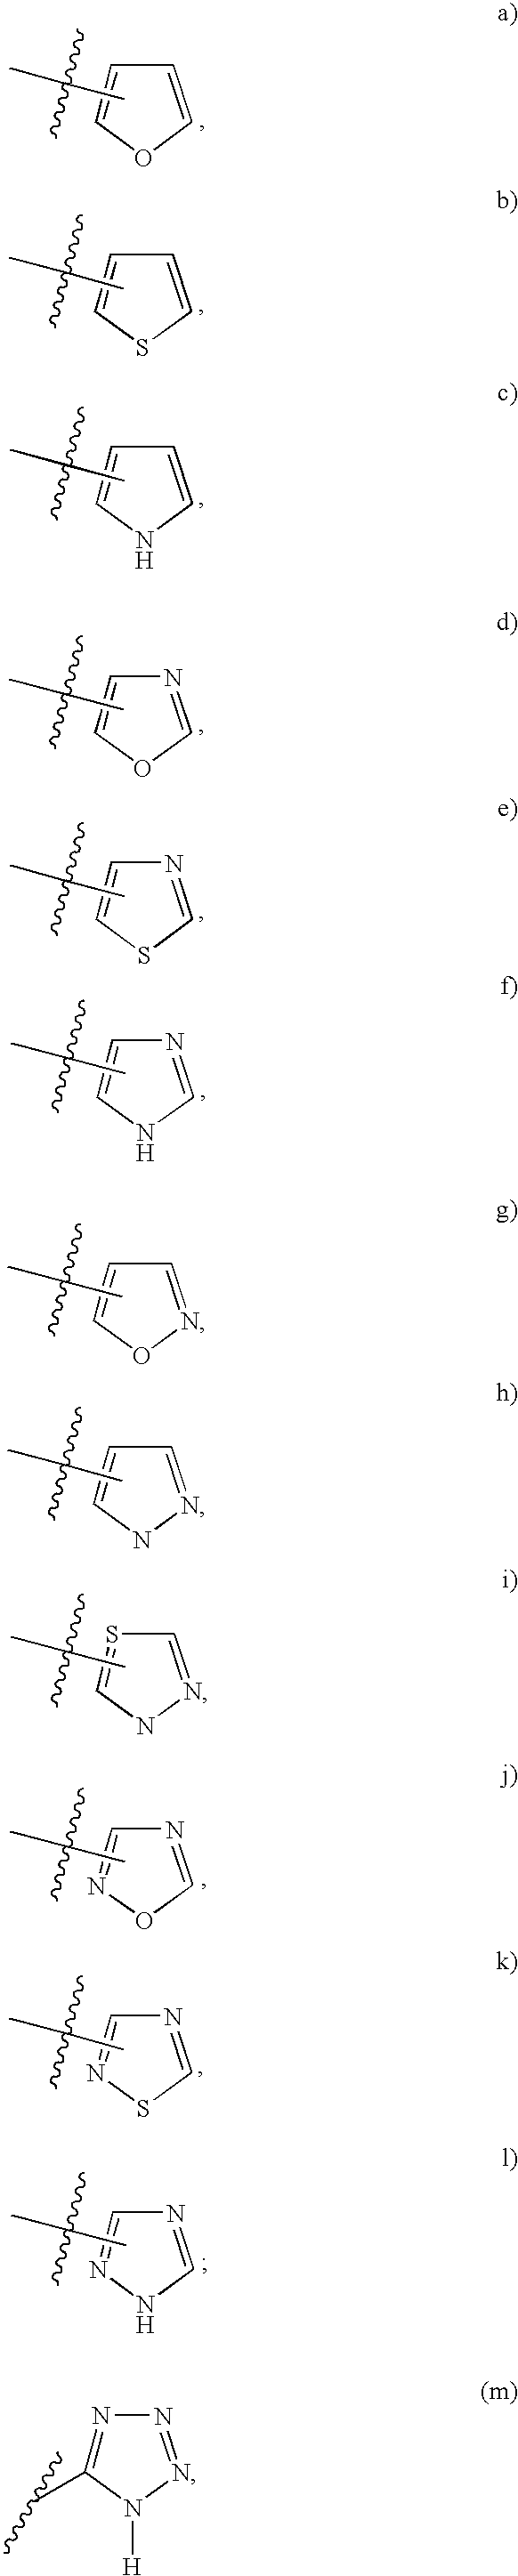 Tricyclic compounds as matrix metalloproteinase inhibitors